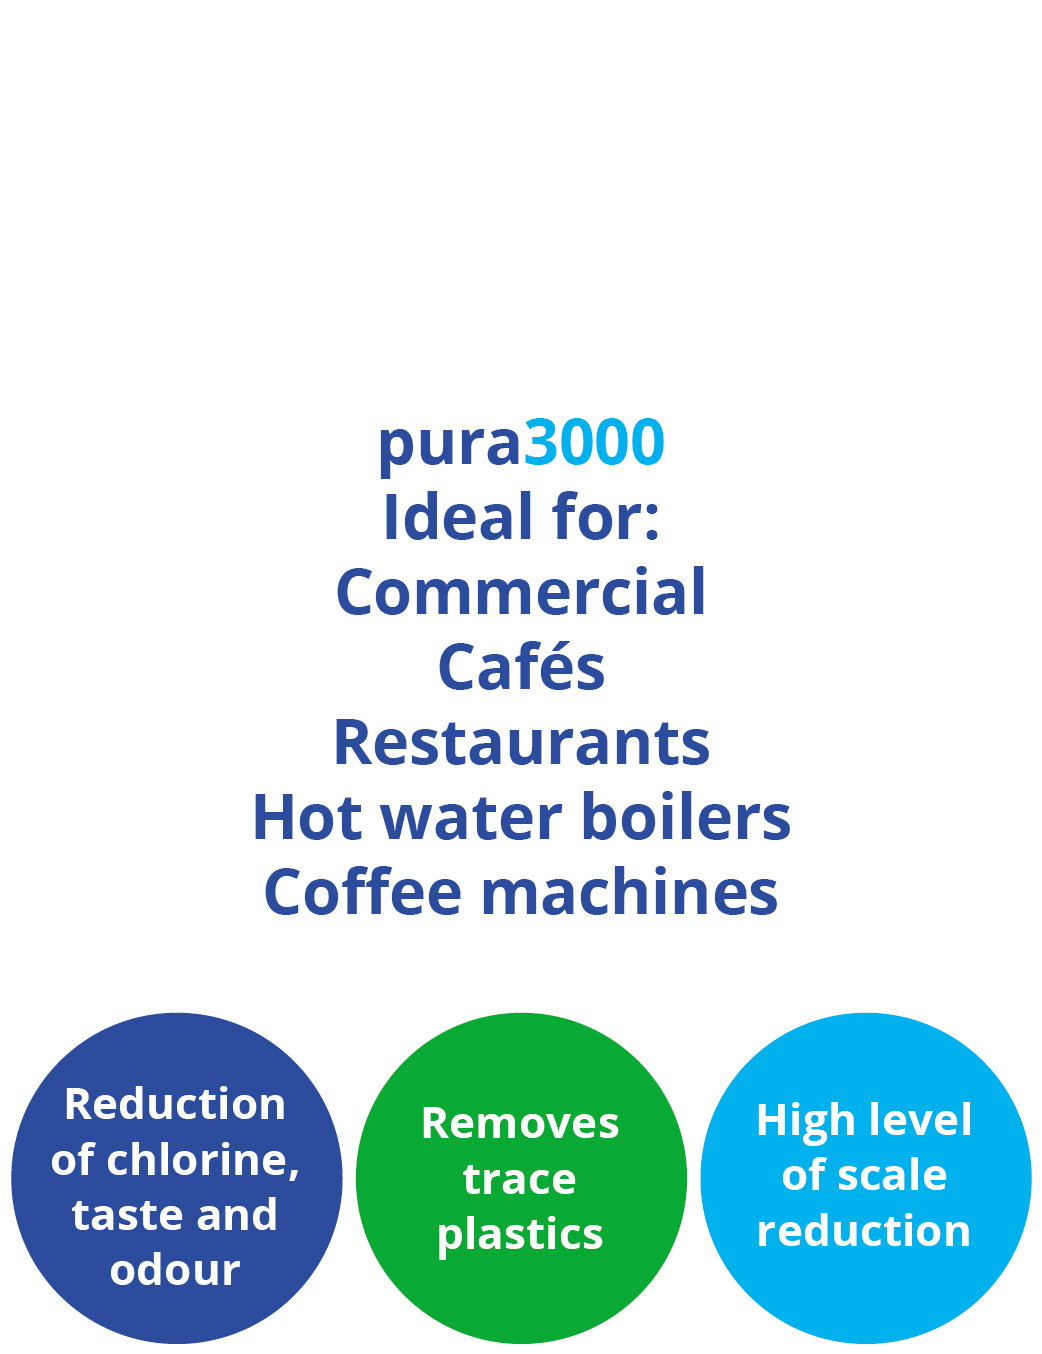 pura3000 Advanced Water Filter for restaurants and cafes